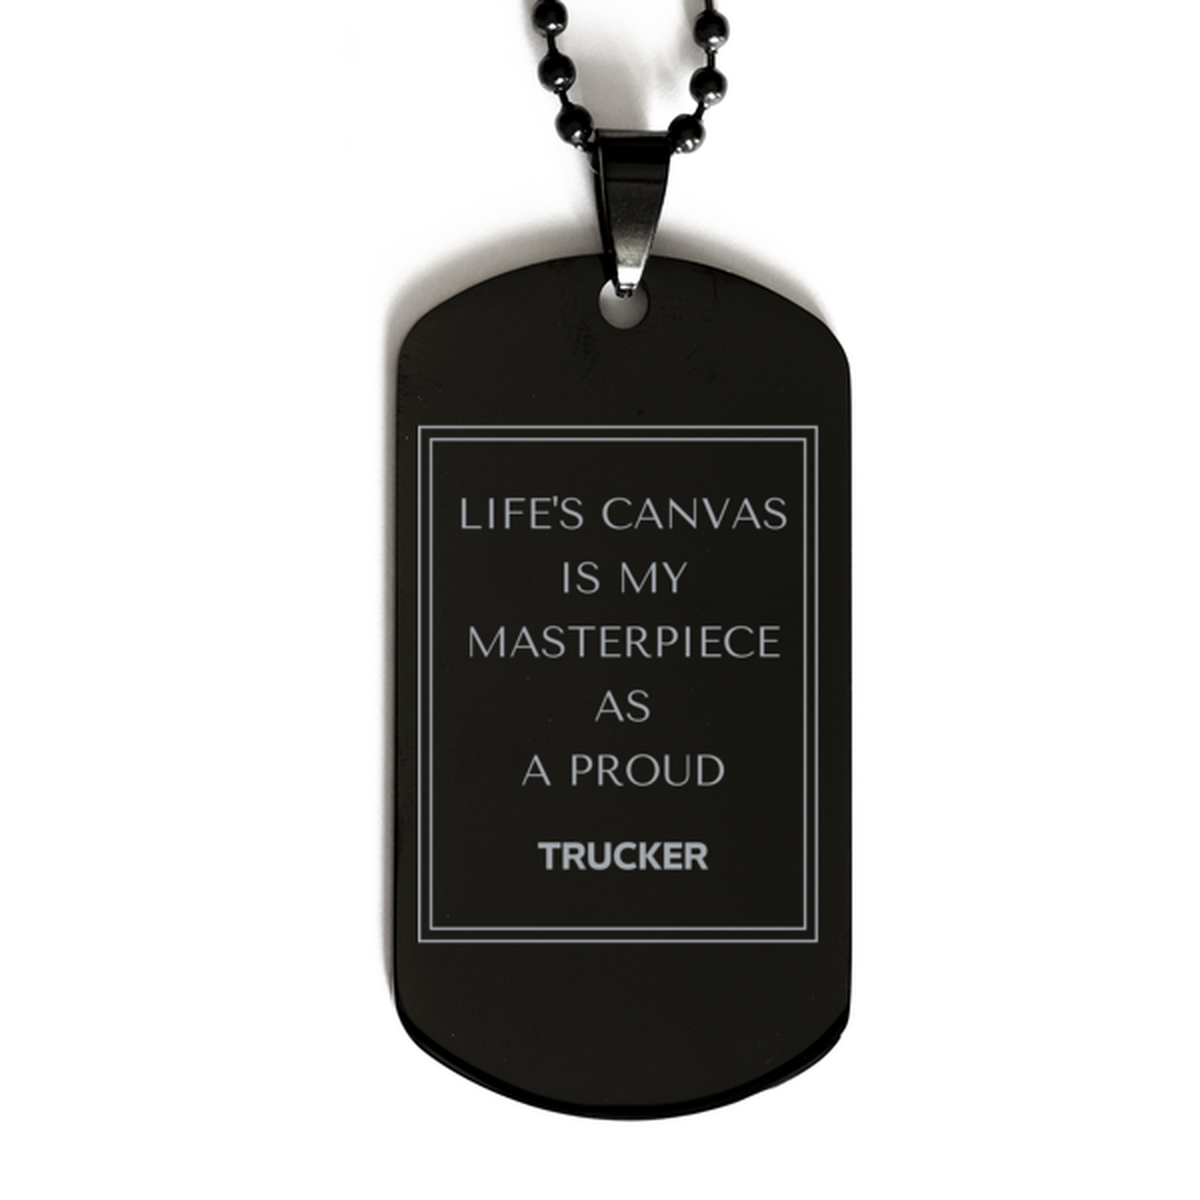 Proud Trucker Gifts, Life's canvas is my masterpiece, Epic Birthday Christmas Unique Black Dog Tag For Trucker, Coworkers, Men, Women, Friends